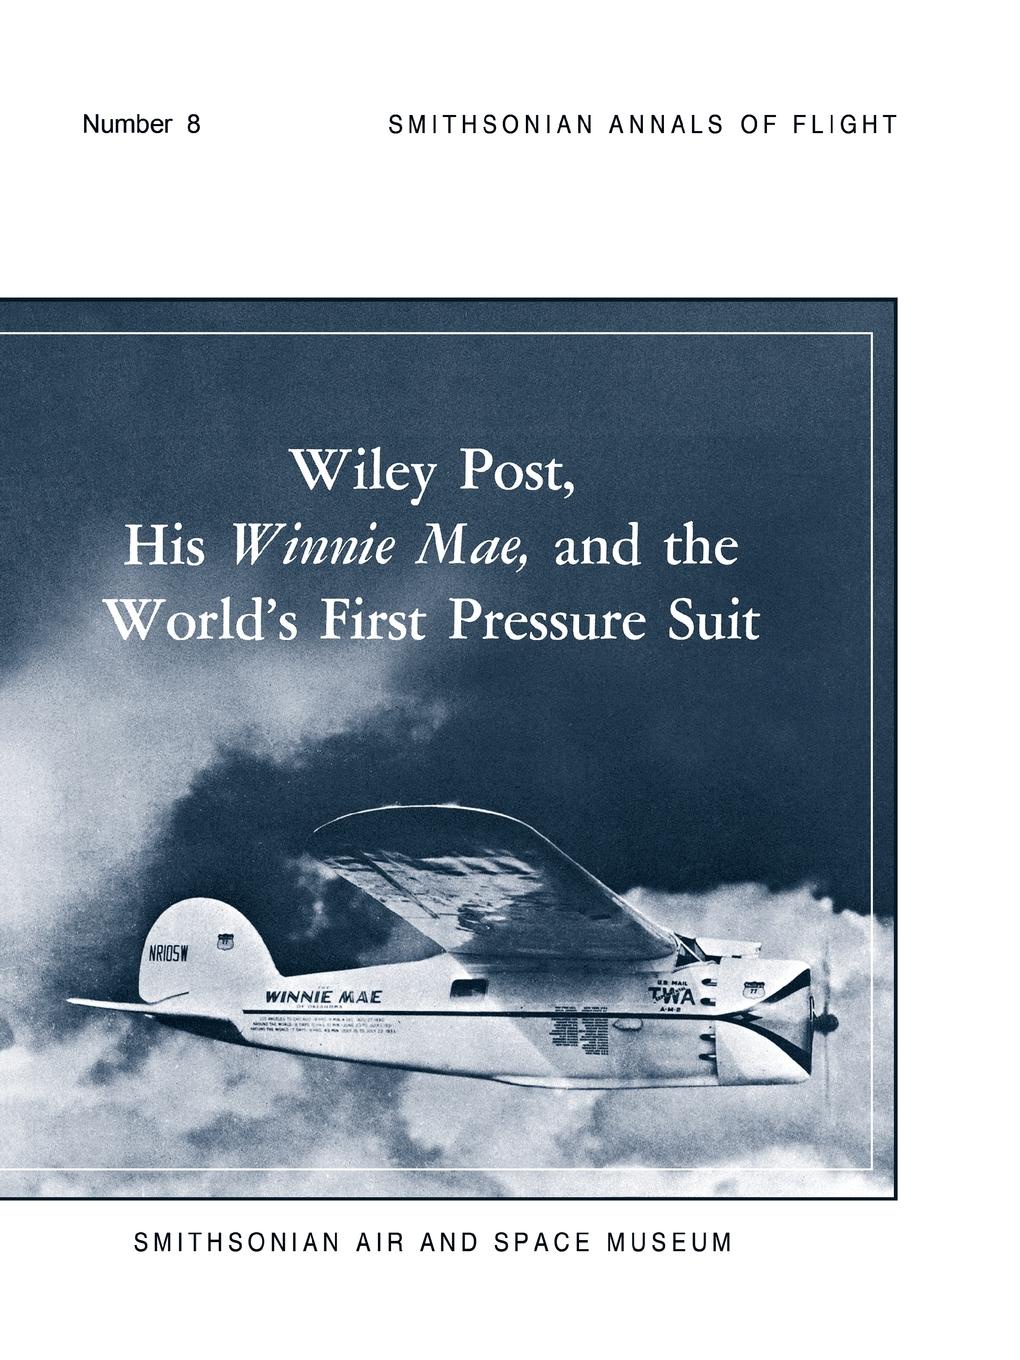 Bobby H. Johnson, Stanley R. Mohler, Smithsonian Air and Space Museum Wiley Post, His Winnie Mae, and the World.s First Pressure Suit